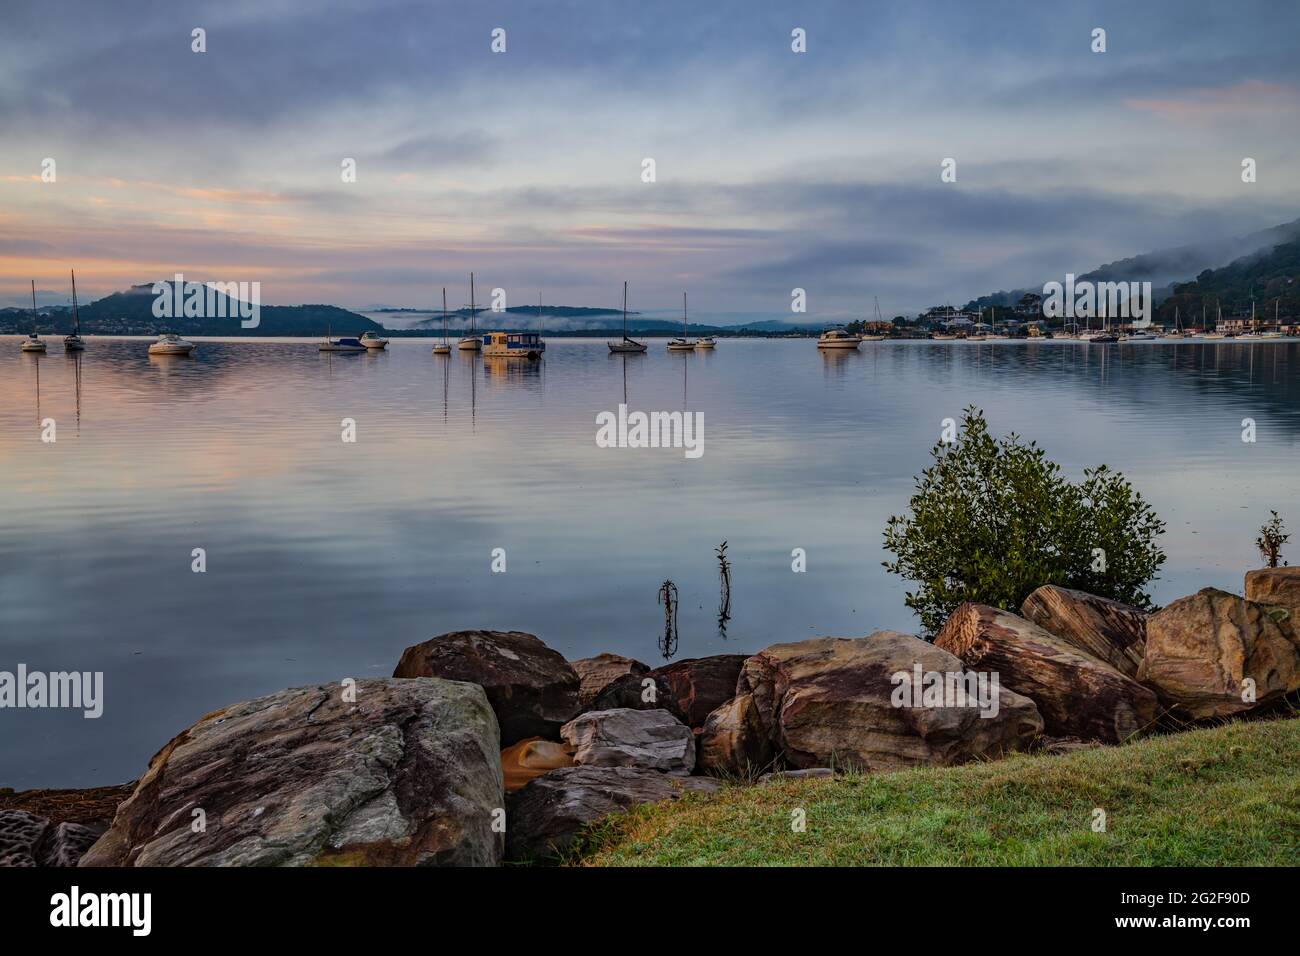 A soft pretty sunrise with boats and fog at Koolewong Waterfront on the Central Coast, NSW, Australia. Stock Photo